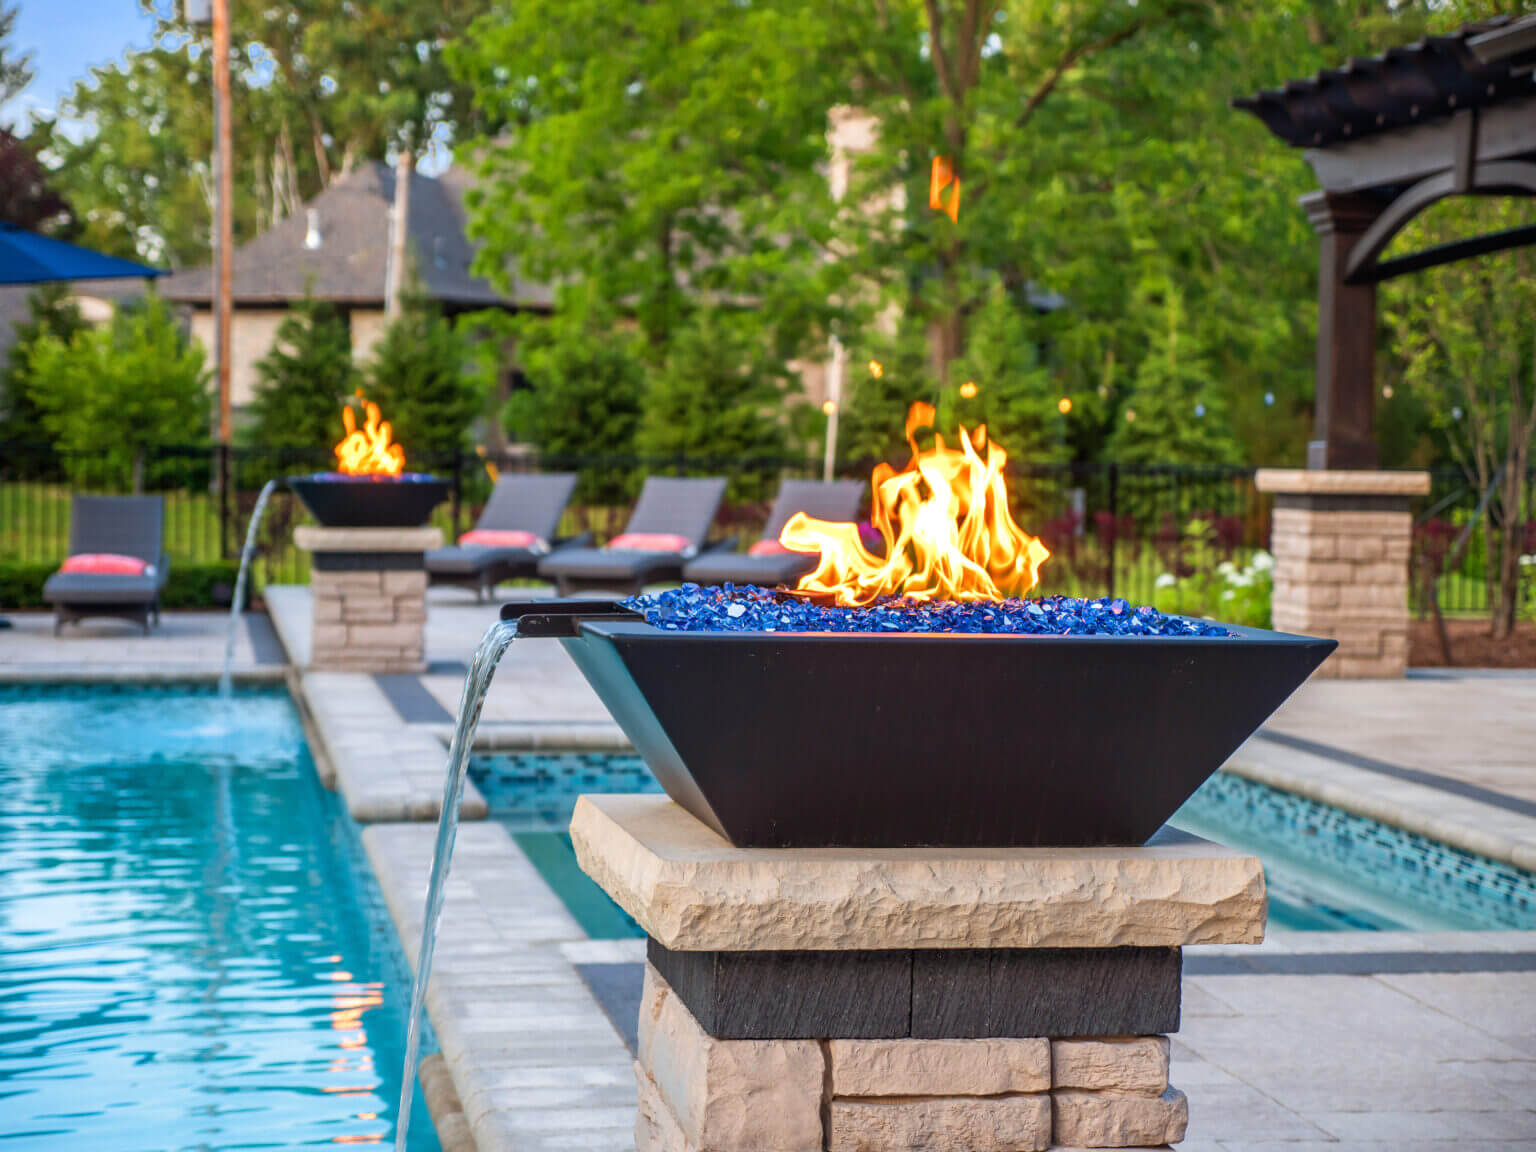 gunite pools, patio pavers, concrete paving, inground pools, pool and spa, fire bowls, patio covers in michigan, patio ideas, pool inspo, gazebos in michigan, cabanas in Michigan, backyard design, backyard landscape design, fire bowls, pool fountains, concrete builders, unilock, outdoor fireplaces in michigan, jacuzzi, outdoor hot tubs, pergola, gazebo, backyard ideas, patio design near me, fire glass